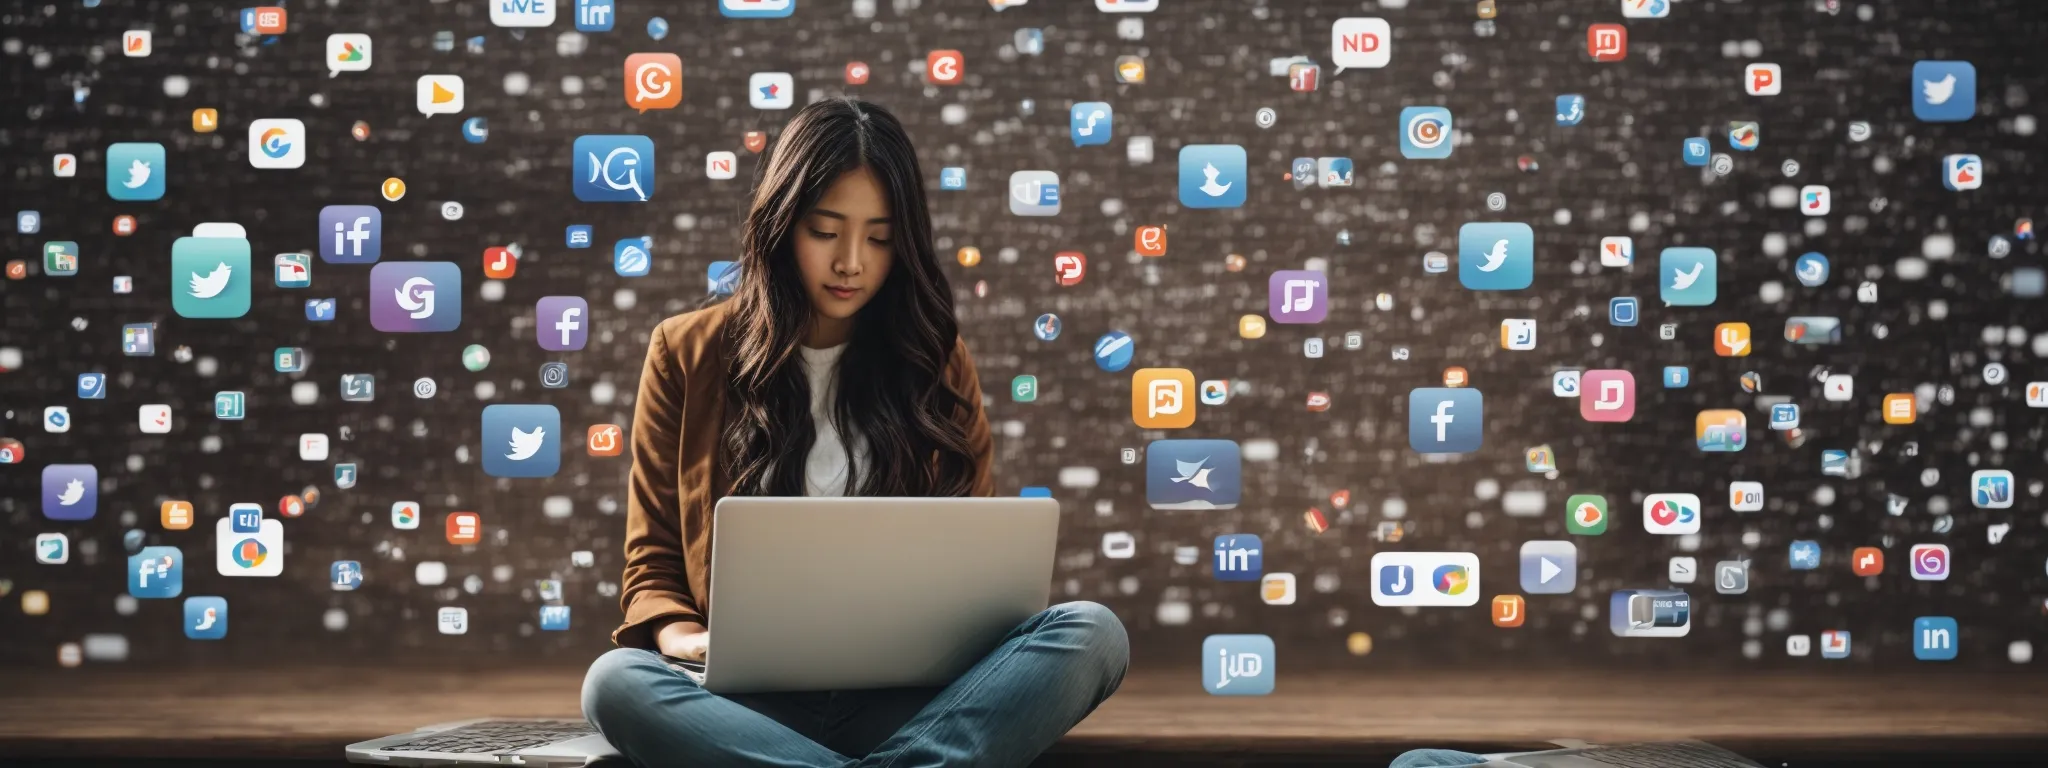 a person sitting with a laptop, surrounded by social media platform icons, orchestrating a digital marketing strategy.